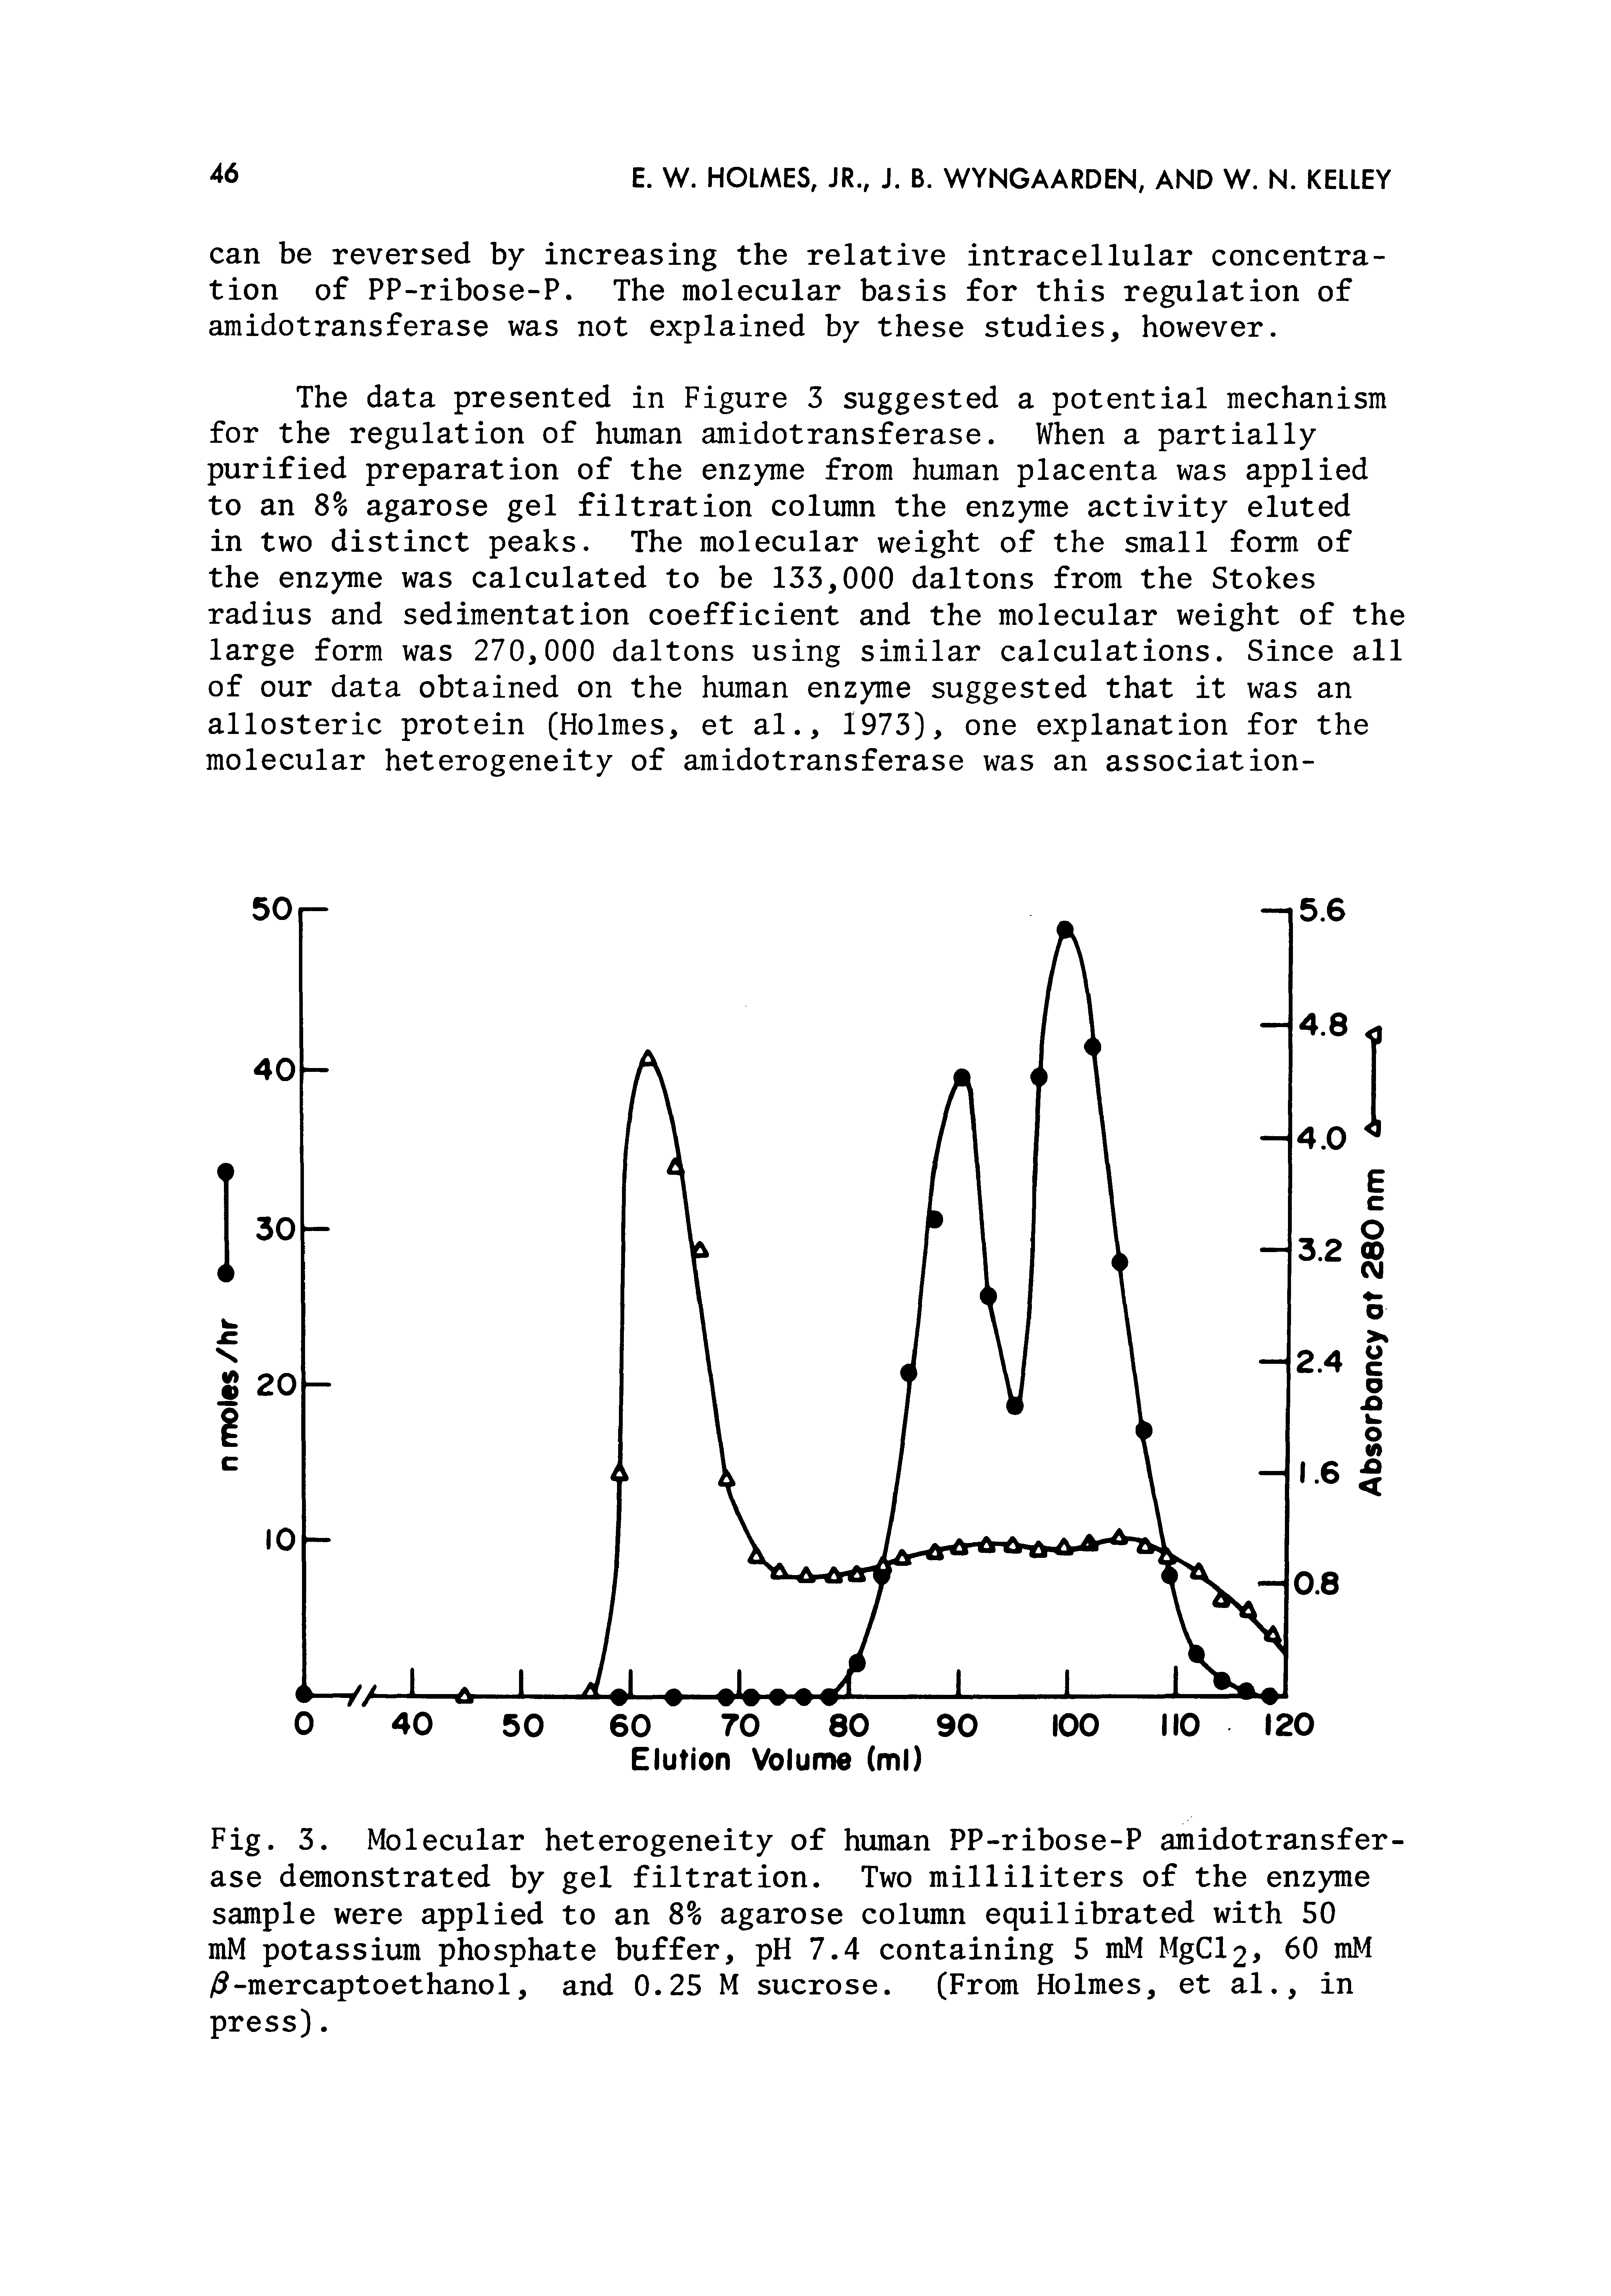 Fig. 3. Molecular heterogeneity of human PP-ribose-P amidotransferase demonstrated by gel filtration. Two milliliters of the enzyme sample were applied to an 8% agarose column equilibrated with 50 mM potassium phosphate buffer, pH 7.4 containing 5 mM MgCl2> 60 mM -mercaptoethanol, and 0.25 M sucrose. (From Holmes, et al., in press).